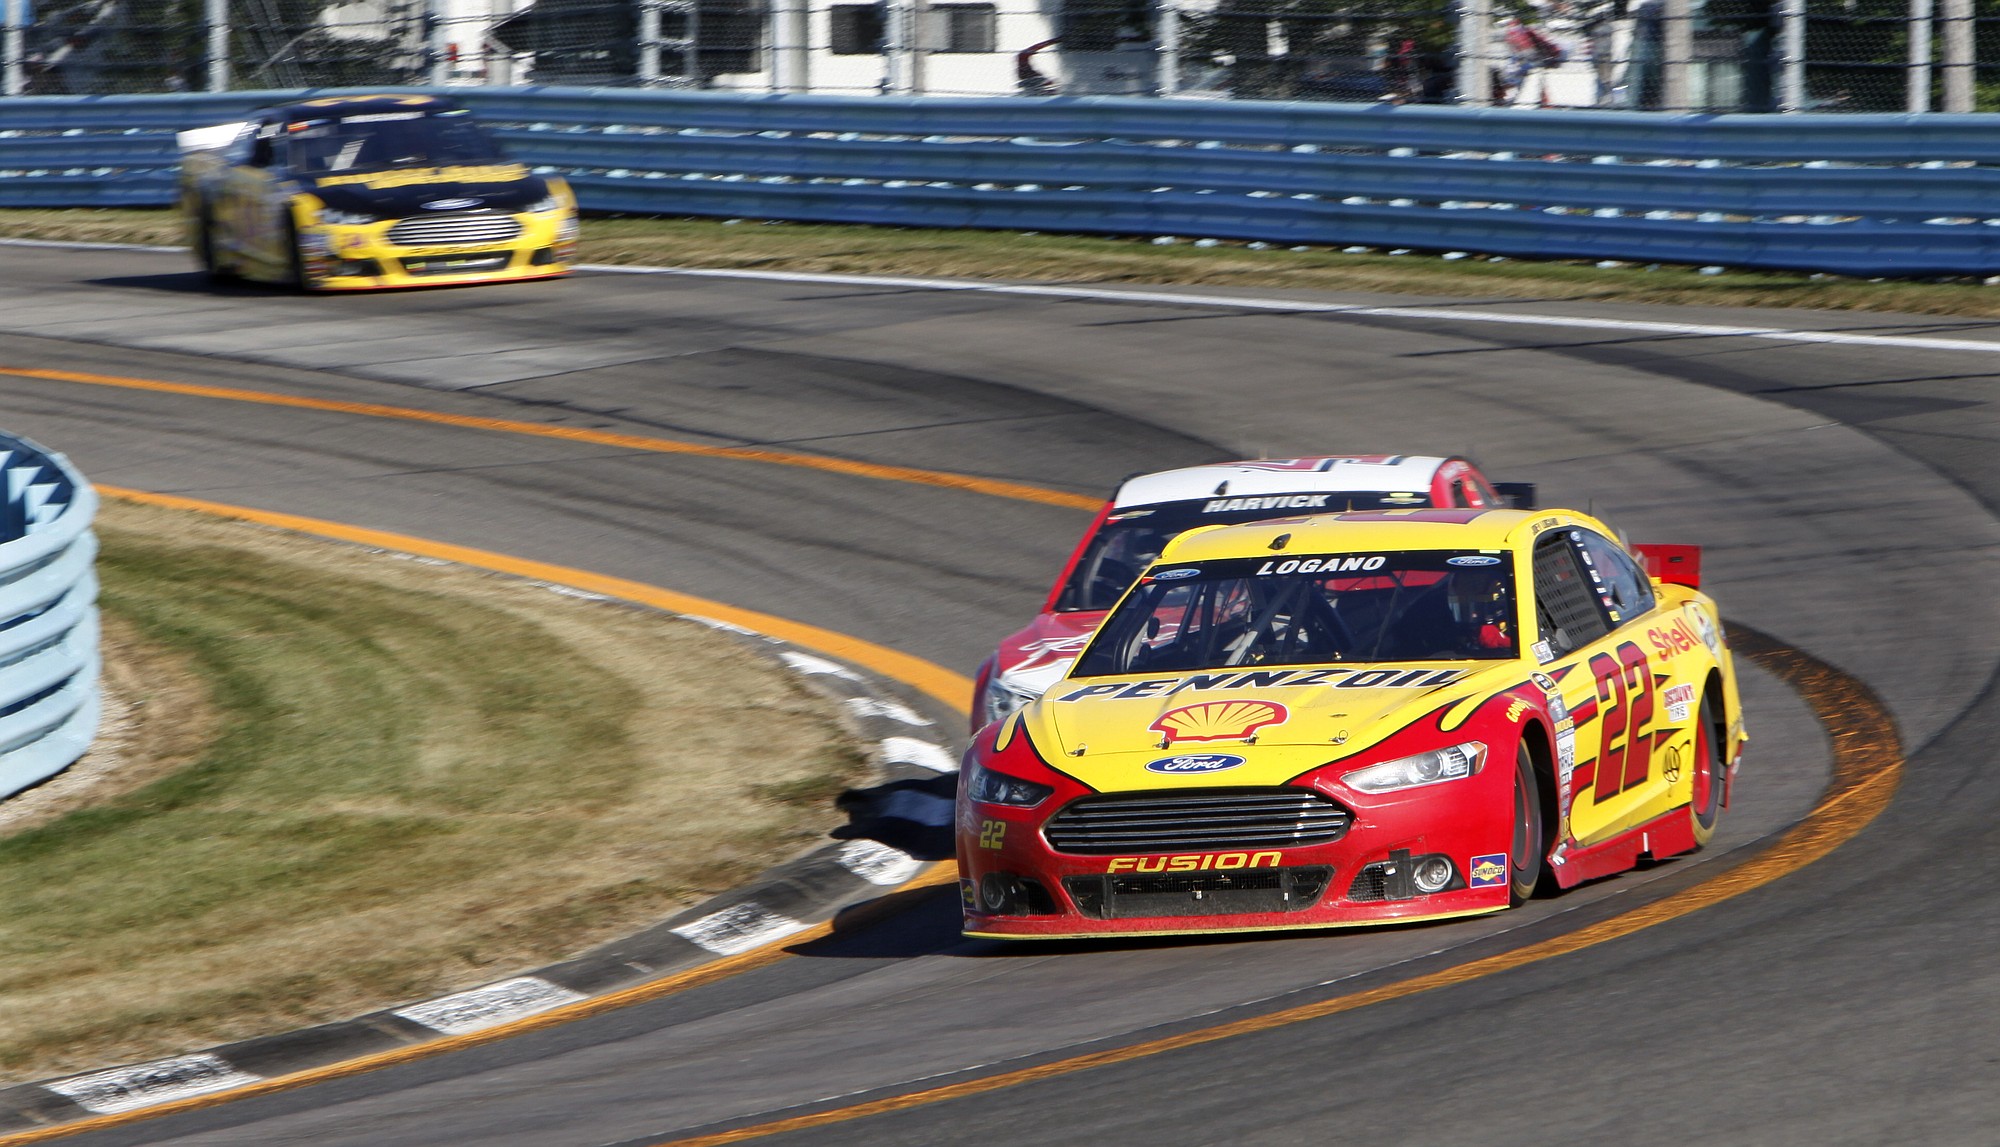 Joey Logano (22) passes Kevin Harvick coming into the last turn on the way to winning a NASCAR Sprint Cup series race at Watkins Glen International, Sunday, Aug. 9, 2015, in Watkins Glen, N.Y.